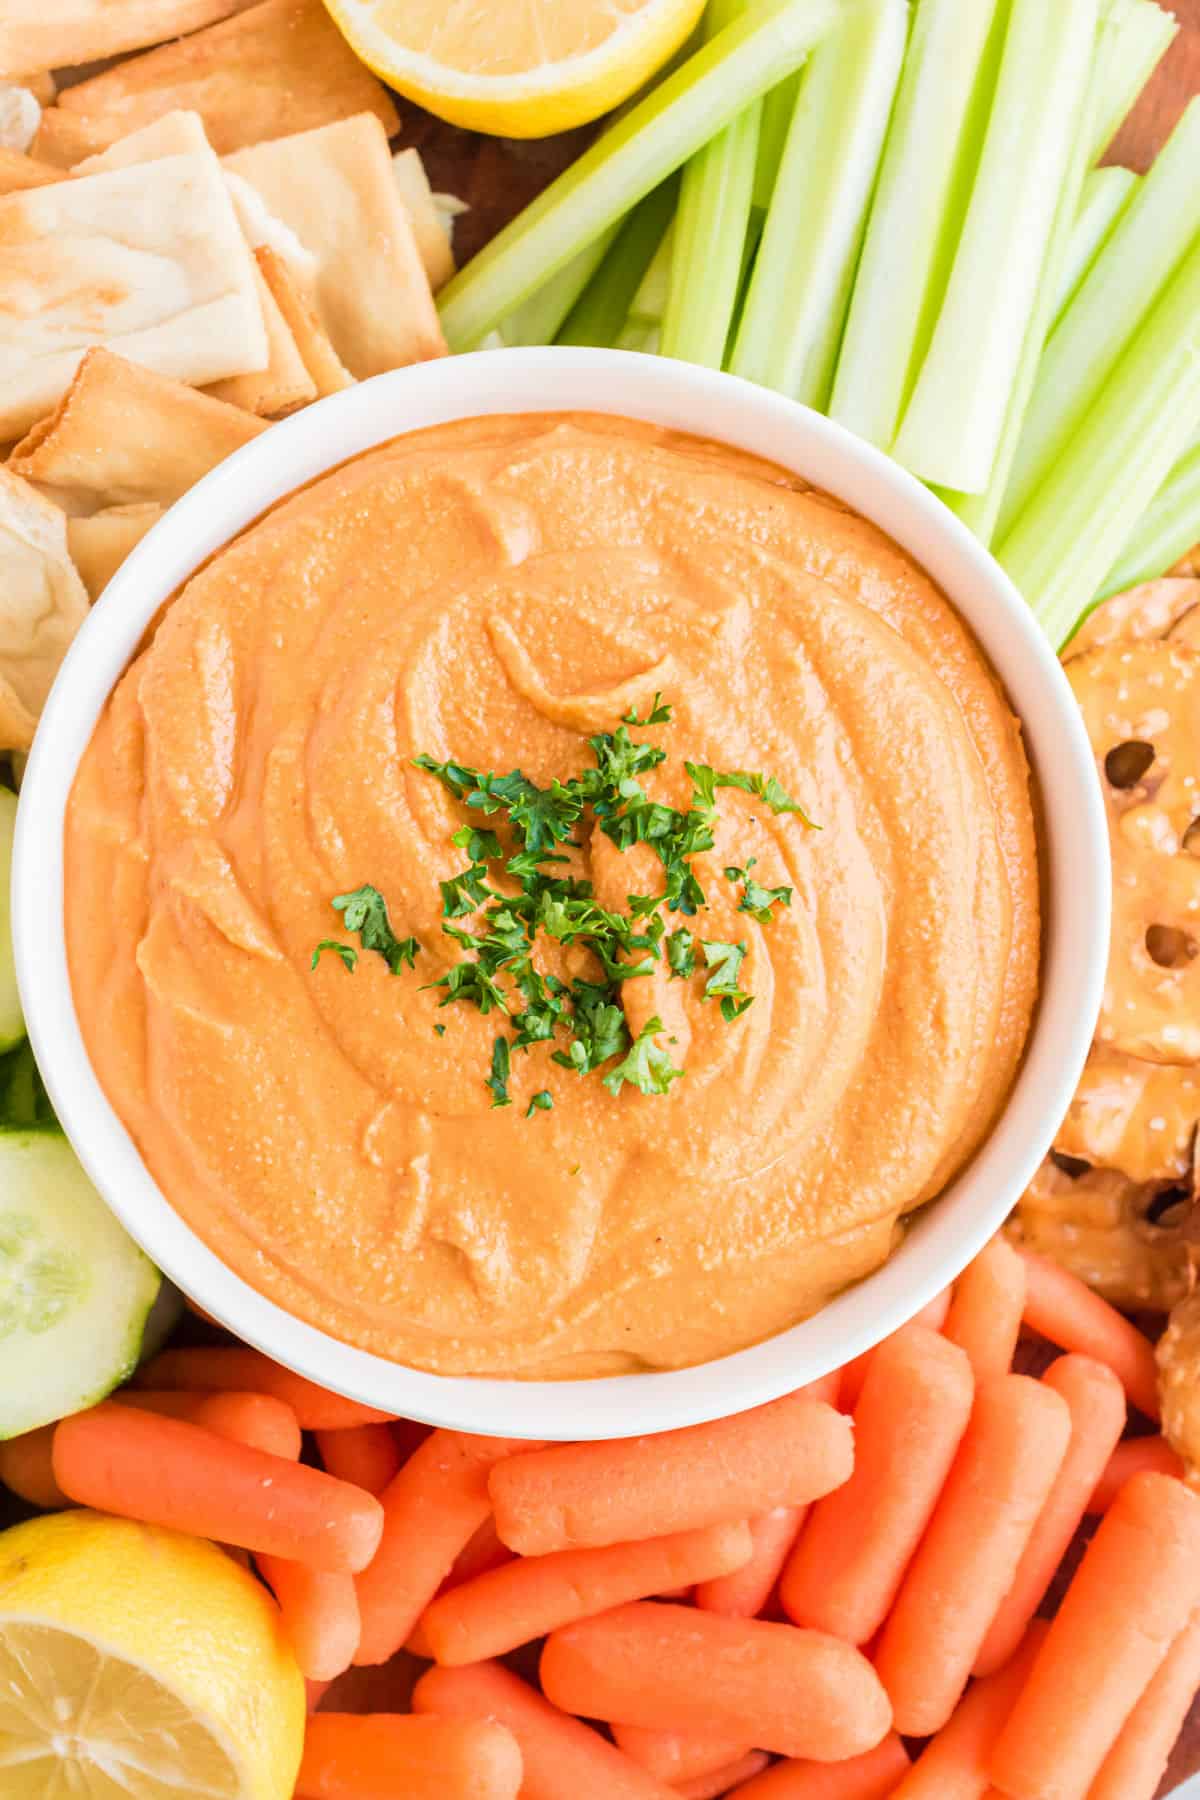 Red pepper hummus in a white bowl serve with veggies and pita chips.